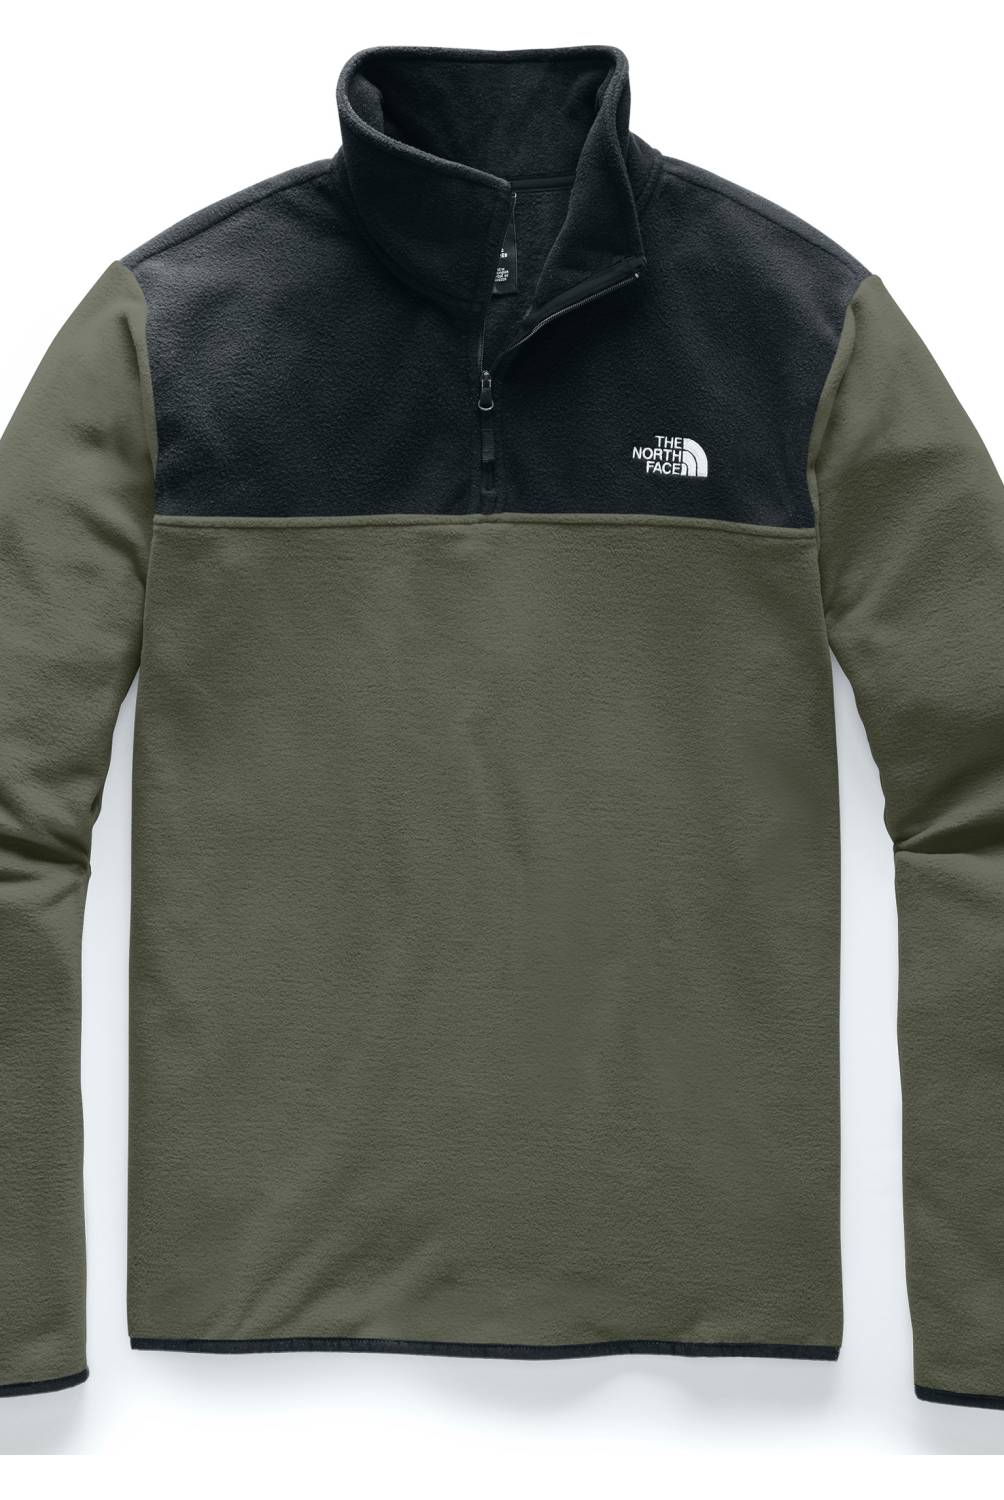 THE NORTH FACE - Polar Mujer